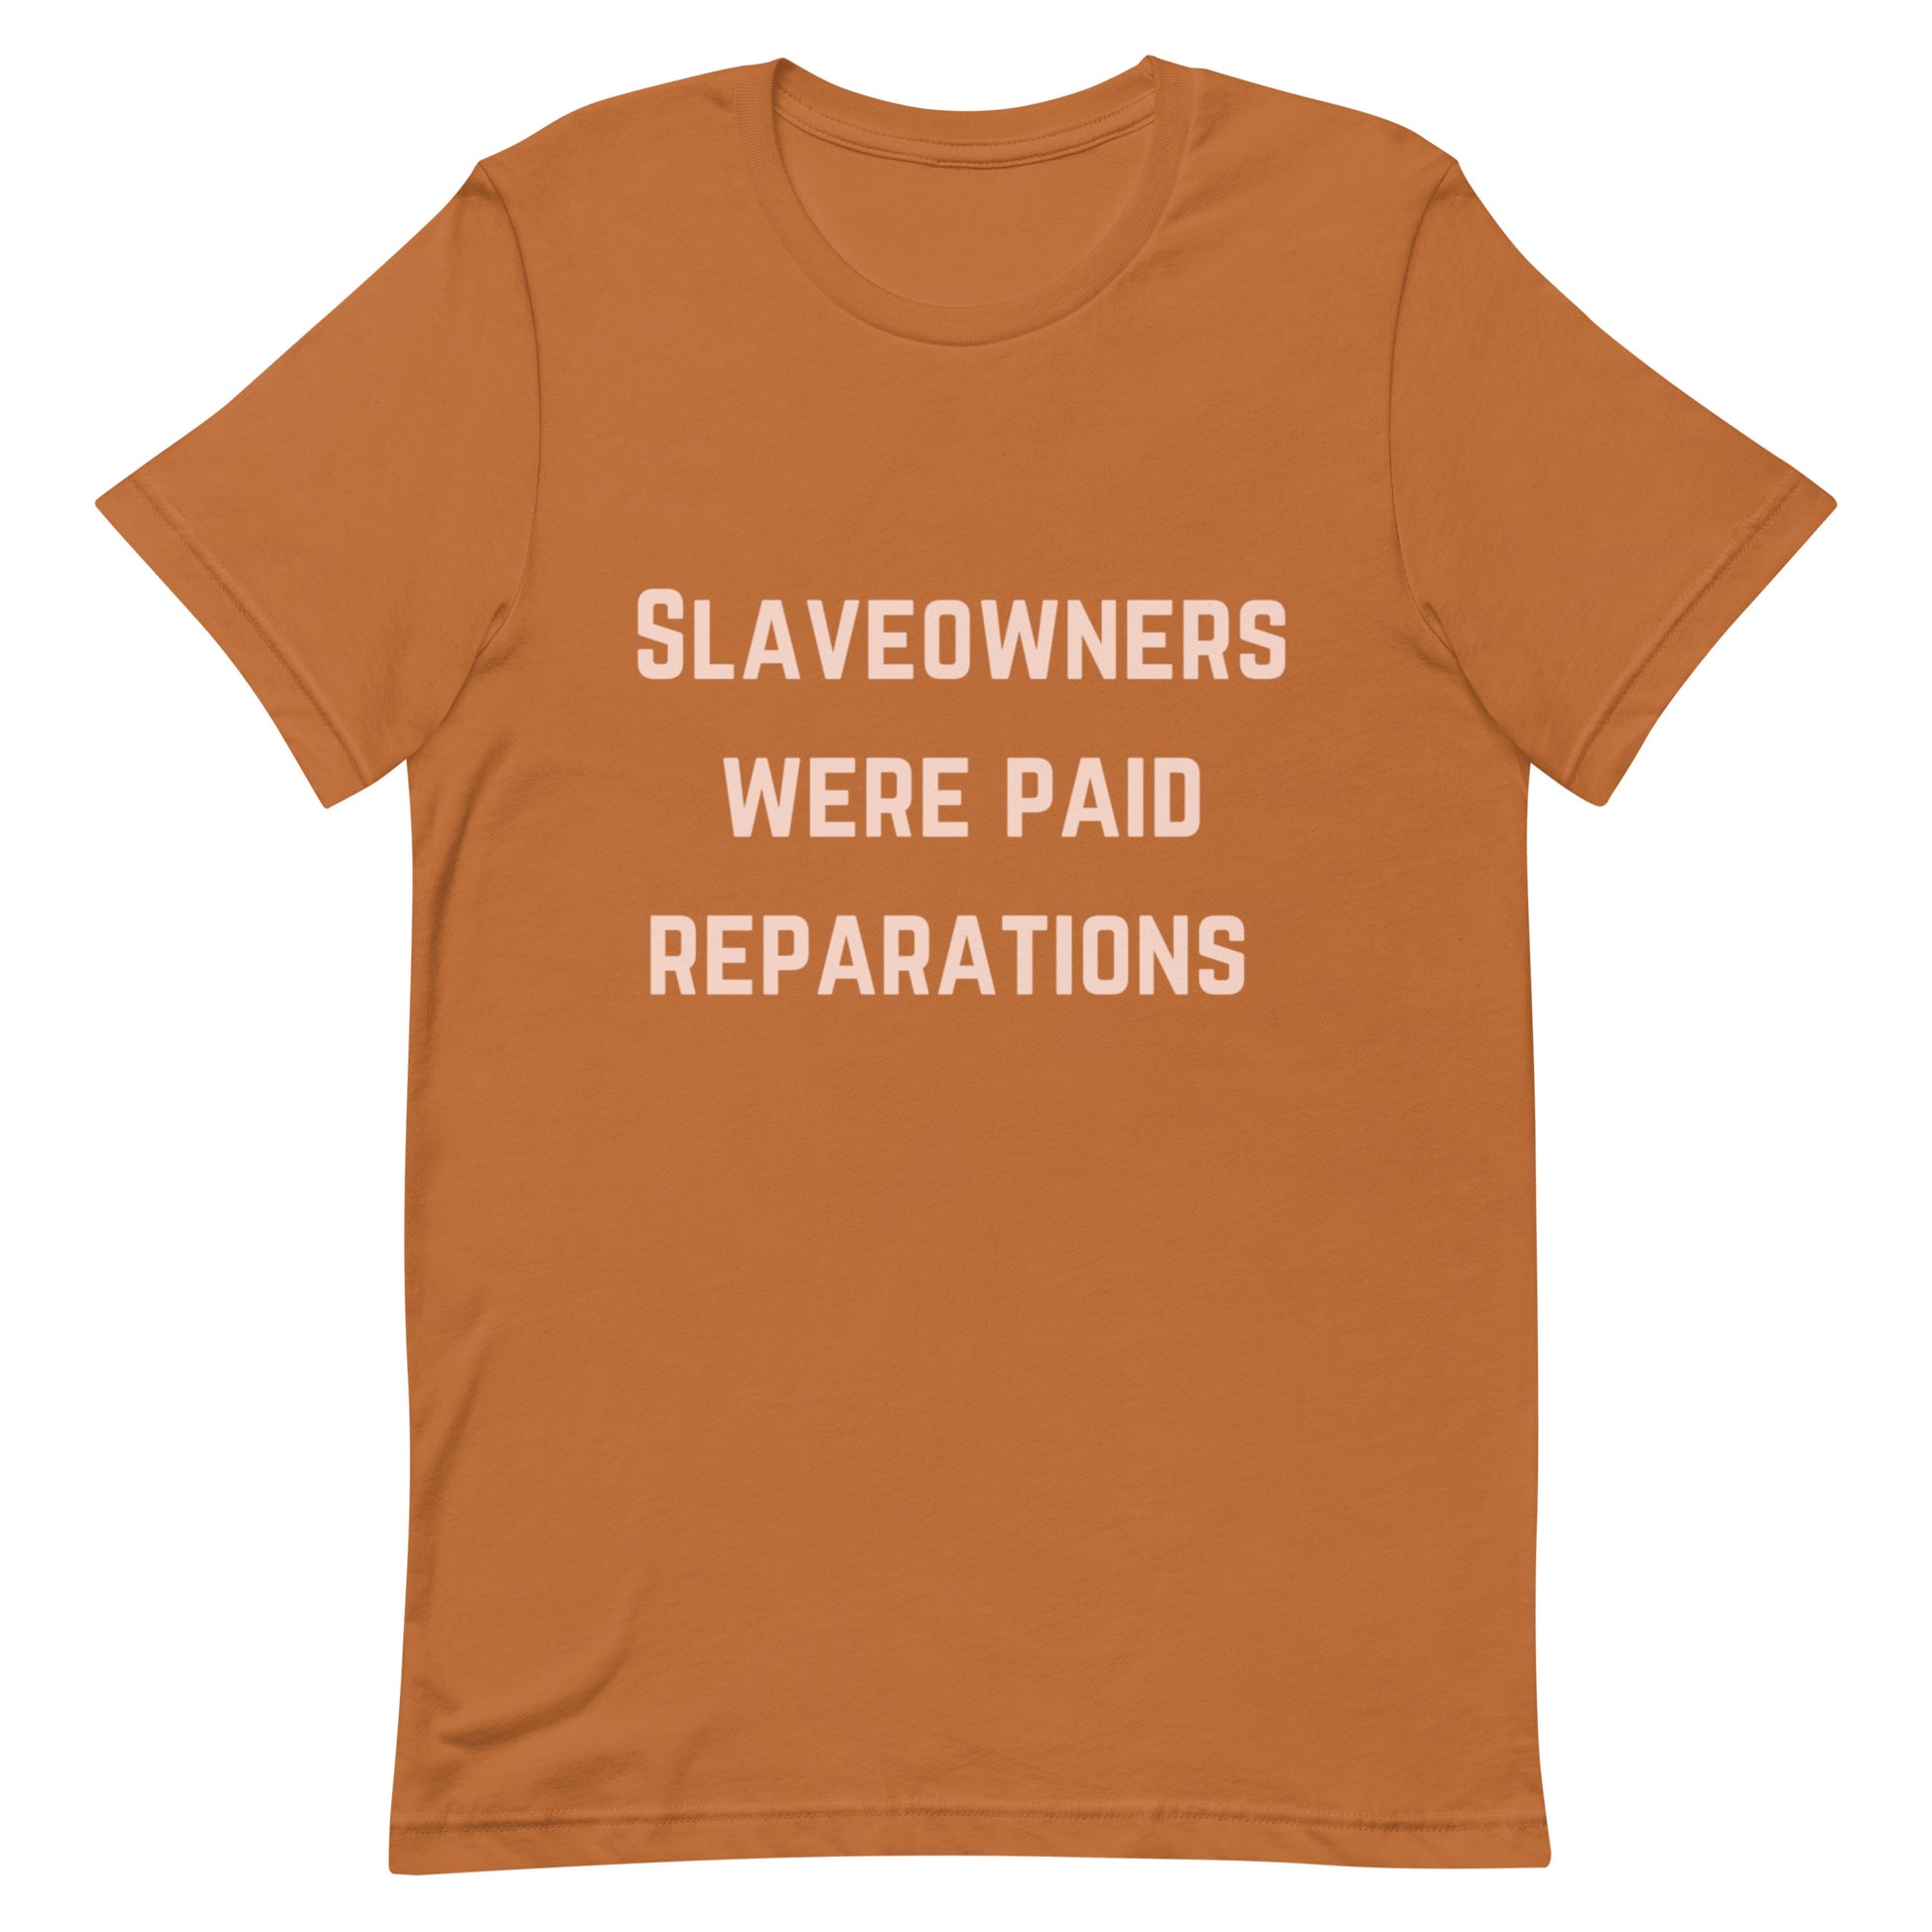 Reparations: Acknowledging the Past, Demanding Justice - Bad Perfectionist Co.